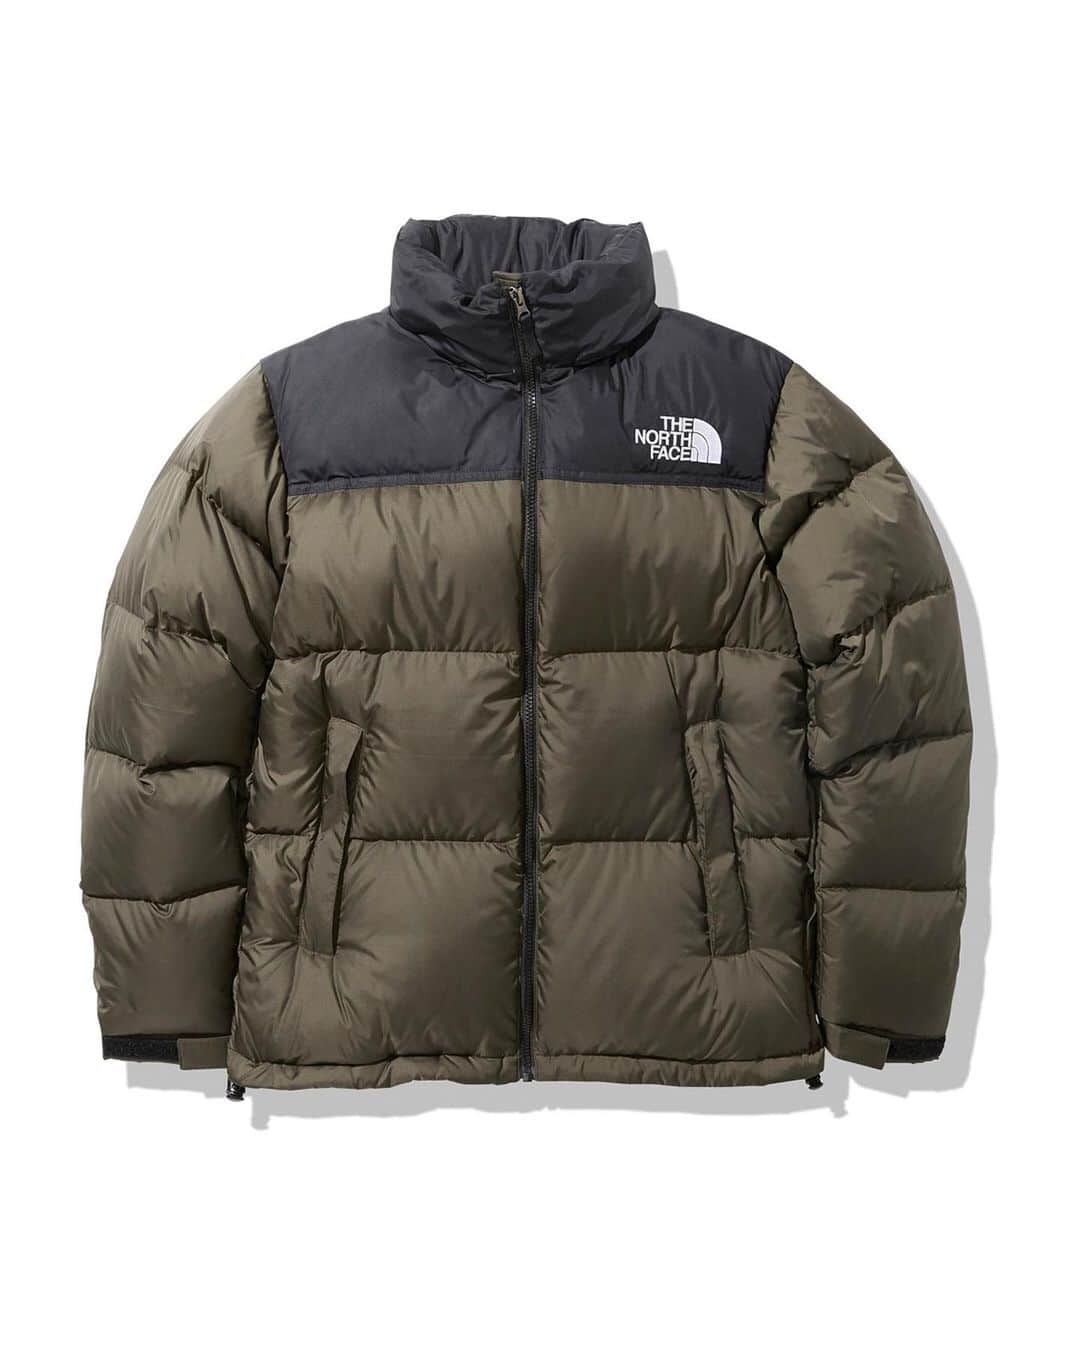 アトモスさんのインスタグラム写真 - (アトモスInstagram)「. 毎年絶大な人気を誇るTHE NORTH FACE NUPTSE JACKETが今年も登場する。 1992年、エクスペディション向けに開発し、1990年代のTHE NORTH FACEを代表するヘリテージモデルであるヌプシジャケット。当時の仕様や素材はそのままに、サイズ感を現代版にアジャスト。断熱・保温性に優れる600フィルパワーのダウンを中わたに使用。表生地は強度がある50デニールのリップストップナイロンに撥水加工を施し、パックに干渉する肩部分はナイロン素材で補強している。静電気の発生を抑える静電ケアシステムを採用。アウトドアからタウンユースまで、幅広く活用できる一着です。 本商品は10/21(WED)よりatmos-tokyo.comで販売し、10/23(FRI)よりatmos新宿店、atmos BLUE表参道店、atmos心斎橋店にて販売致します。 . THE NORTH FACE NUPTSE JACKET, which is extremely popular every year, and it will appear again at this year. Developed for expedition in 1992, the NUPTSE JACKET is a heritage model that represents THE NORTH FACE in the 1990s. The specifications and materials at that time are kept as they are, and the size is adjusted to the modern version. 600 fill power down with excellent heat insulation and heat retention is used for the inner pad. The outer fabric is a strong 50 denier ripstop nylon with a water repellent finish, and the shoulders that interfere with the pack are reinforced with nylon material. Uses an electrostatic care system that suppresses the generation of static electricity. It is the first place that can be widely used from outdoor to town use. This product will be on sale at atmos-tokyo.com from 10/21 (WED) and at atmos Shinjuku, atmos BLUE Omotesando, and atmos Shinsaibashi from 10/23 (FRI). . #atmos #atmostokyo #atmosjapan #thenorthface #northface #nuptse #nuptsejacket #アトモス #ノースフェイス」10月20日 10時19分 - atmos_japan